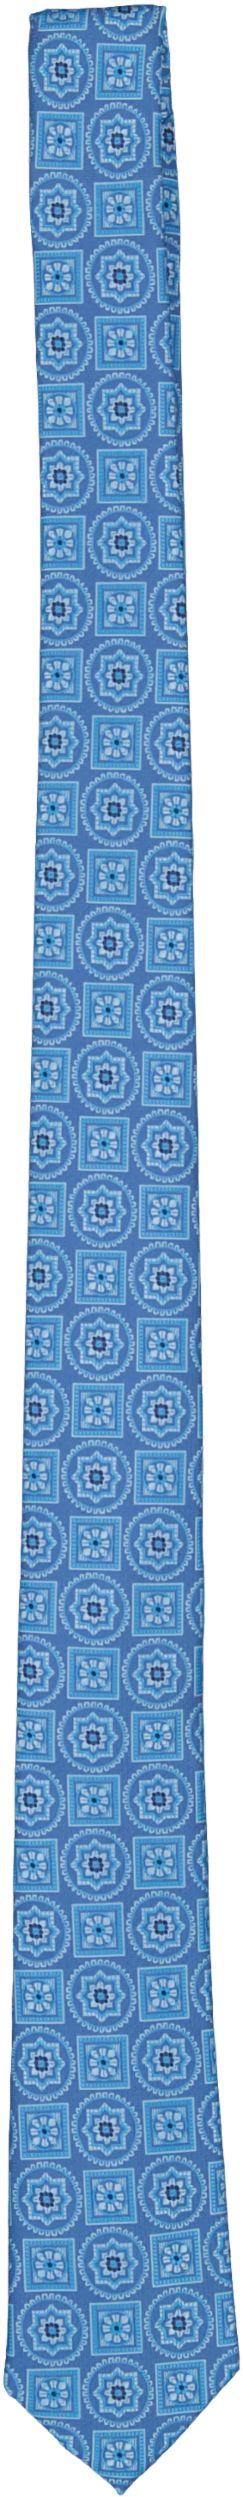 T.O. Collection Mens Necktie - TO233